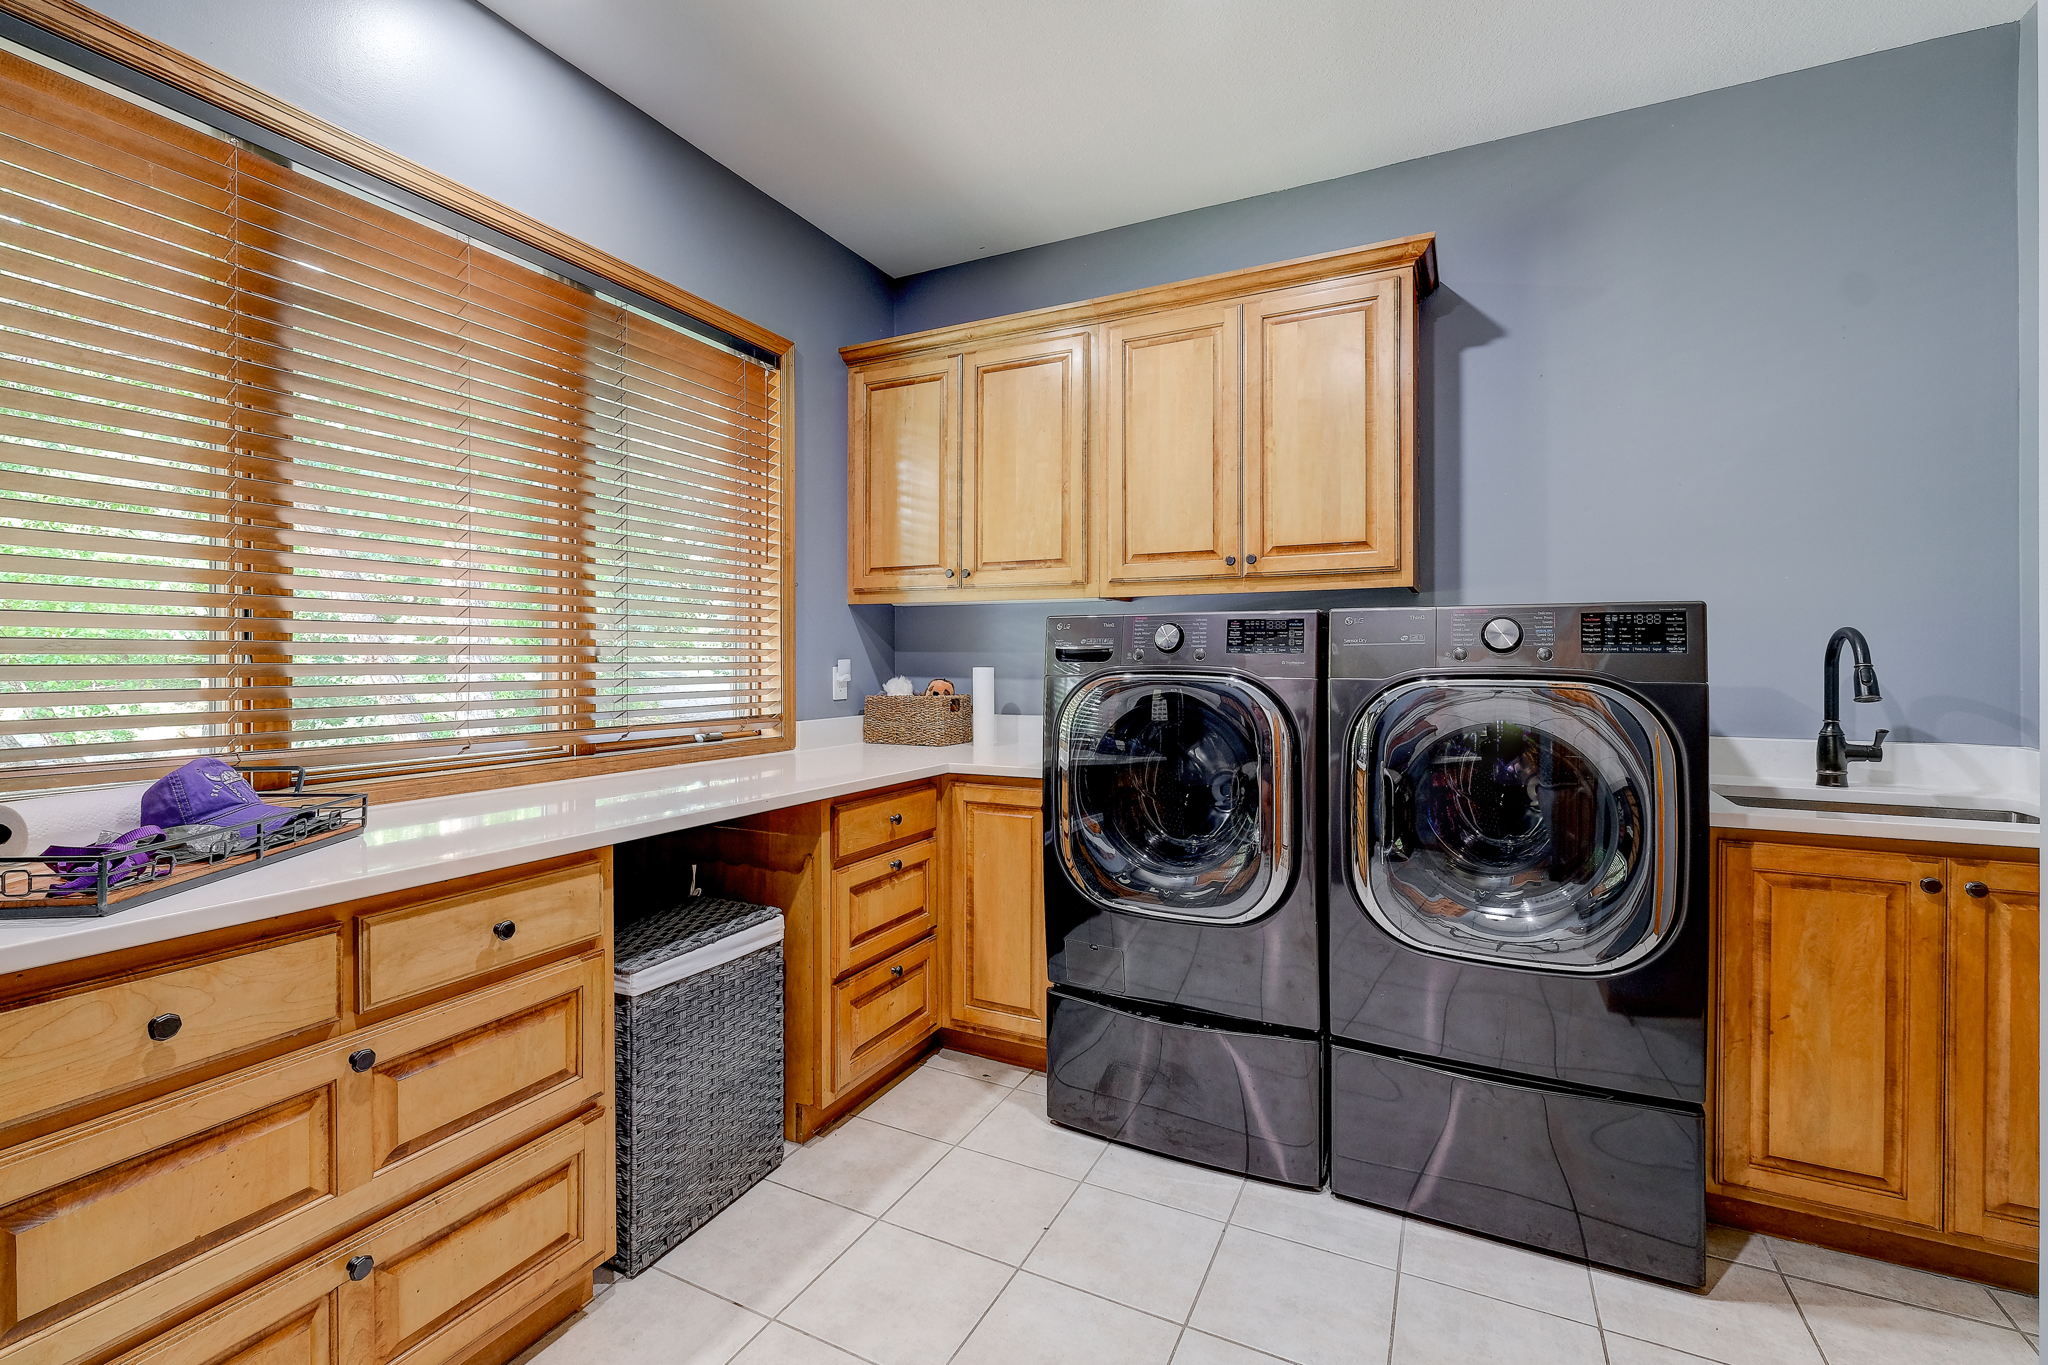 Main floor laundry with new washer/dryer.  Washer features mini wash load in bottom pedestal.